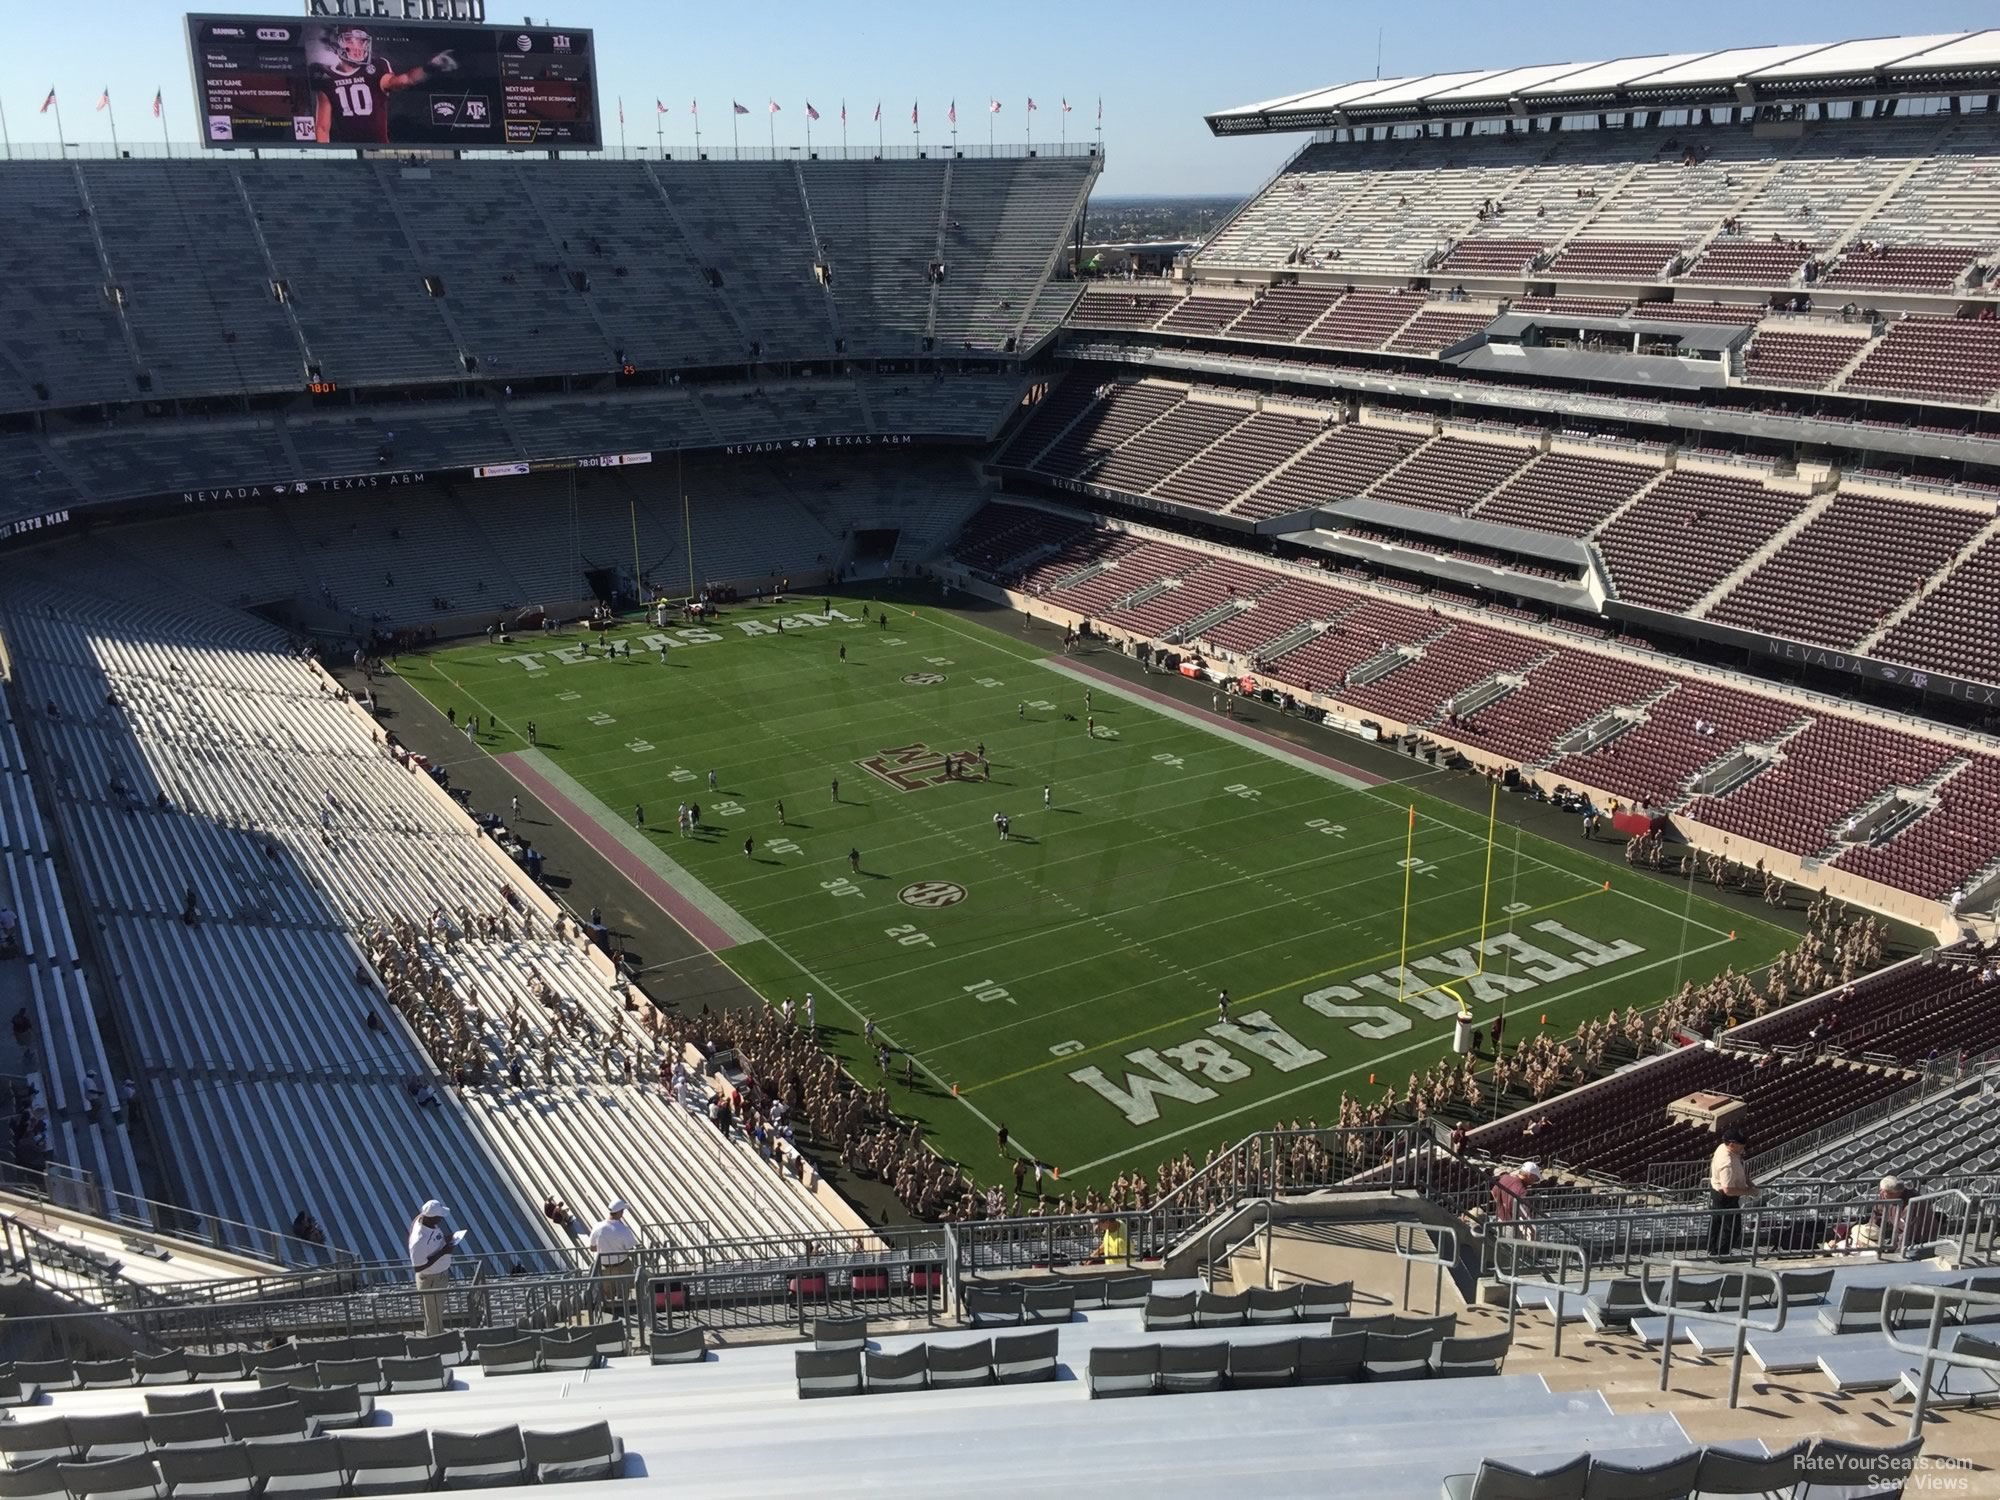 section 421, row 20 seat view  - kyle field